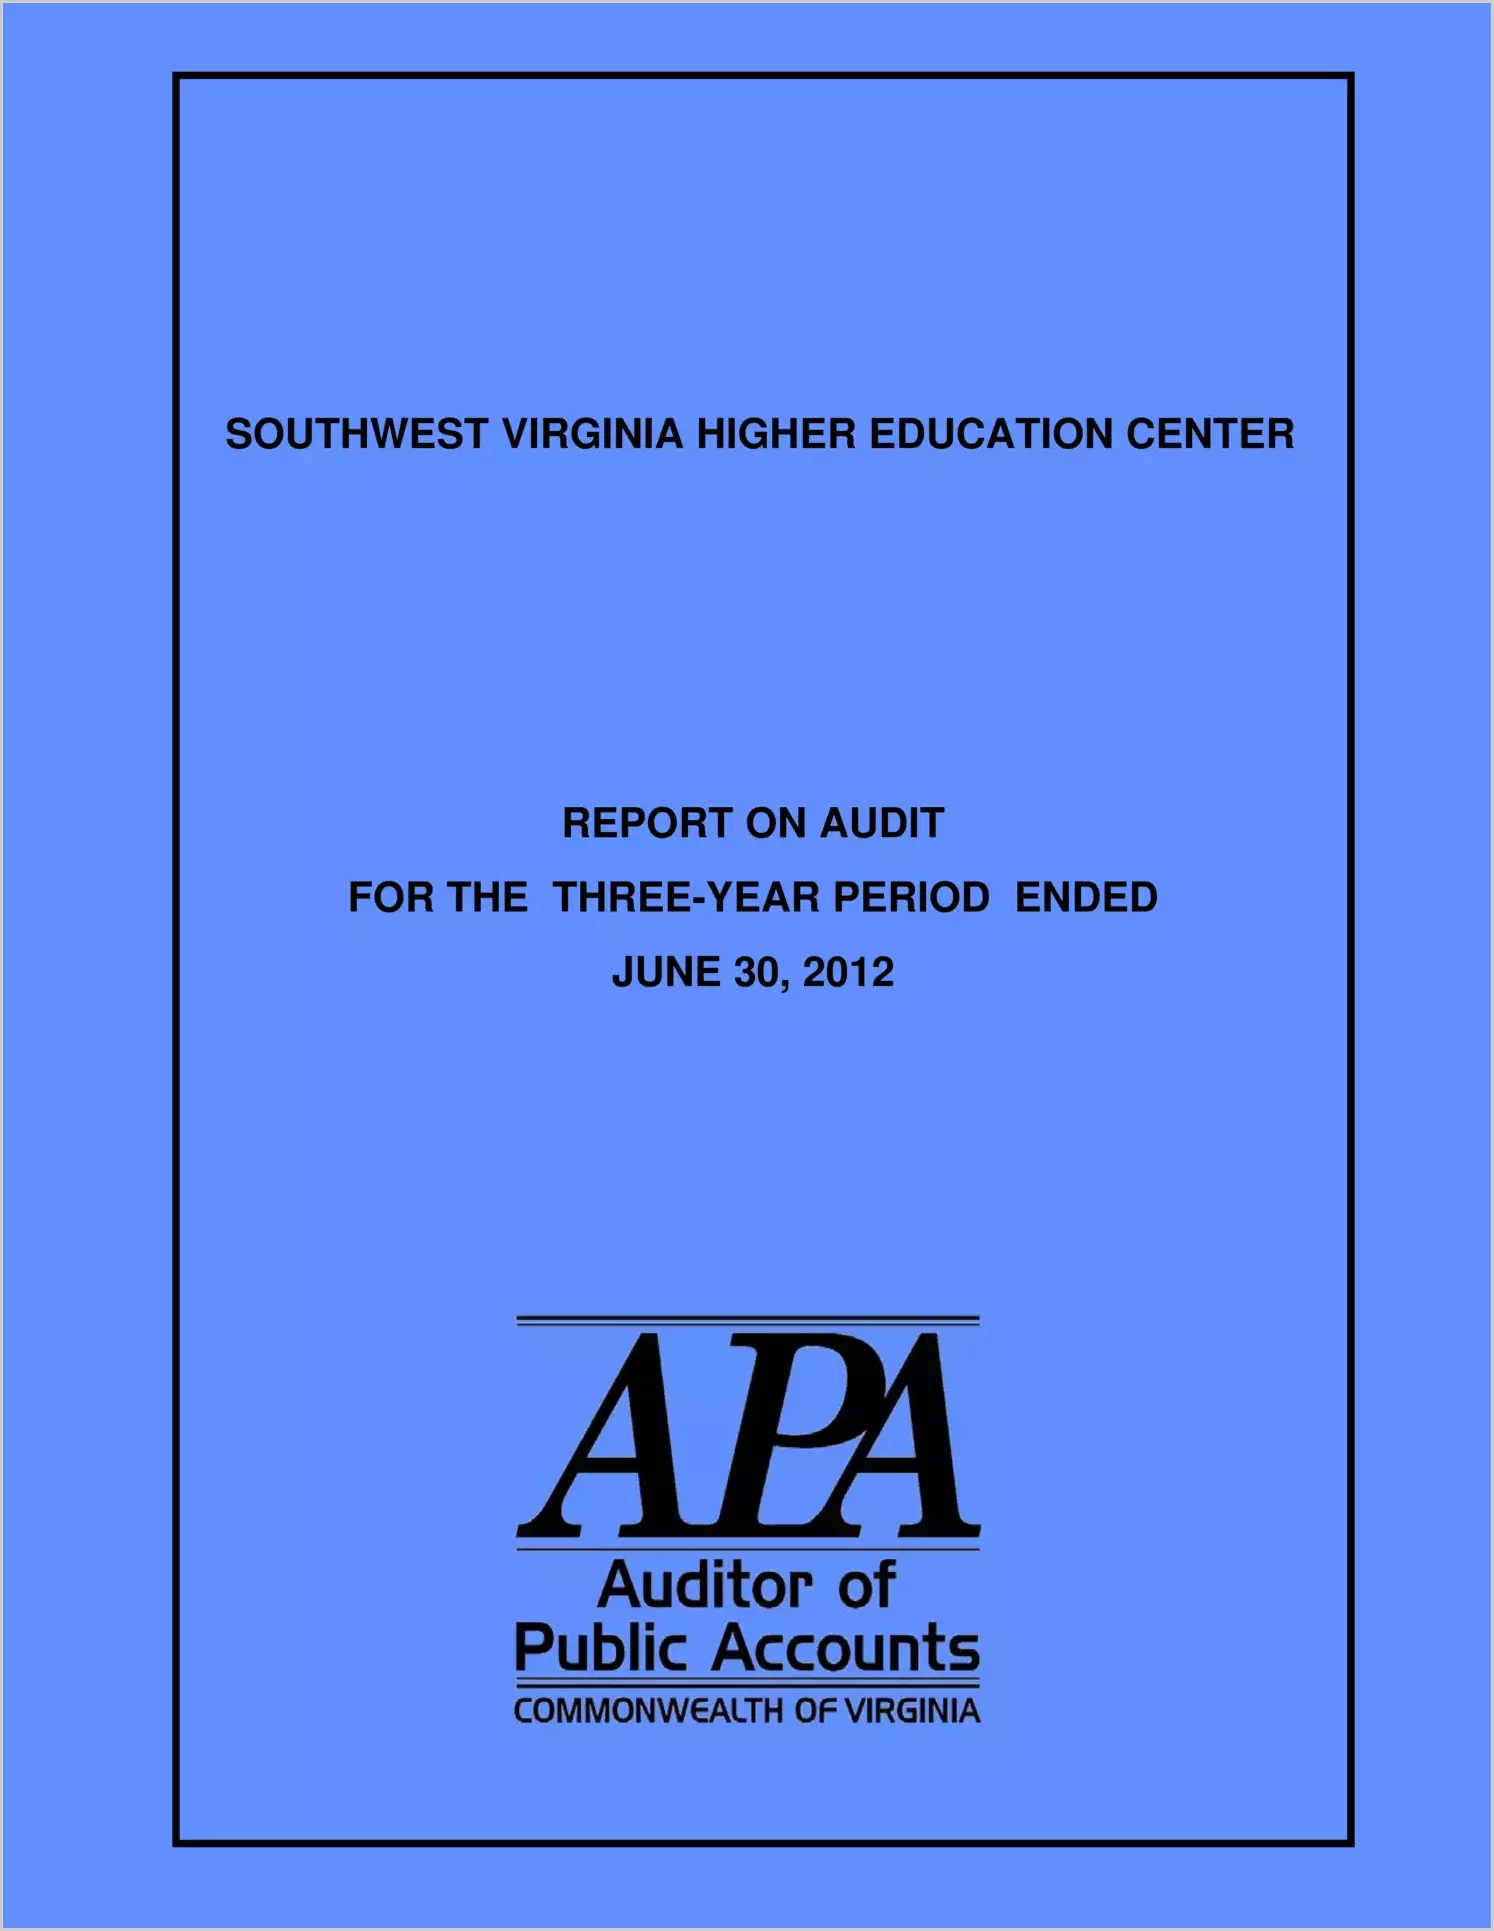 Southwest Virginia Higher Education Center for the three-year period ended June 30, 2012